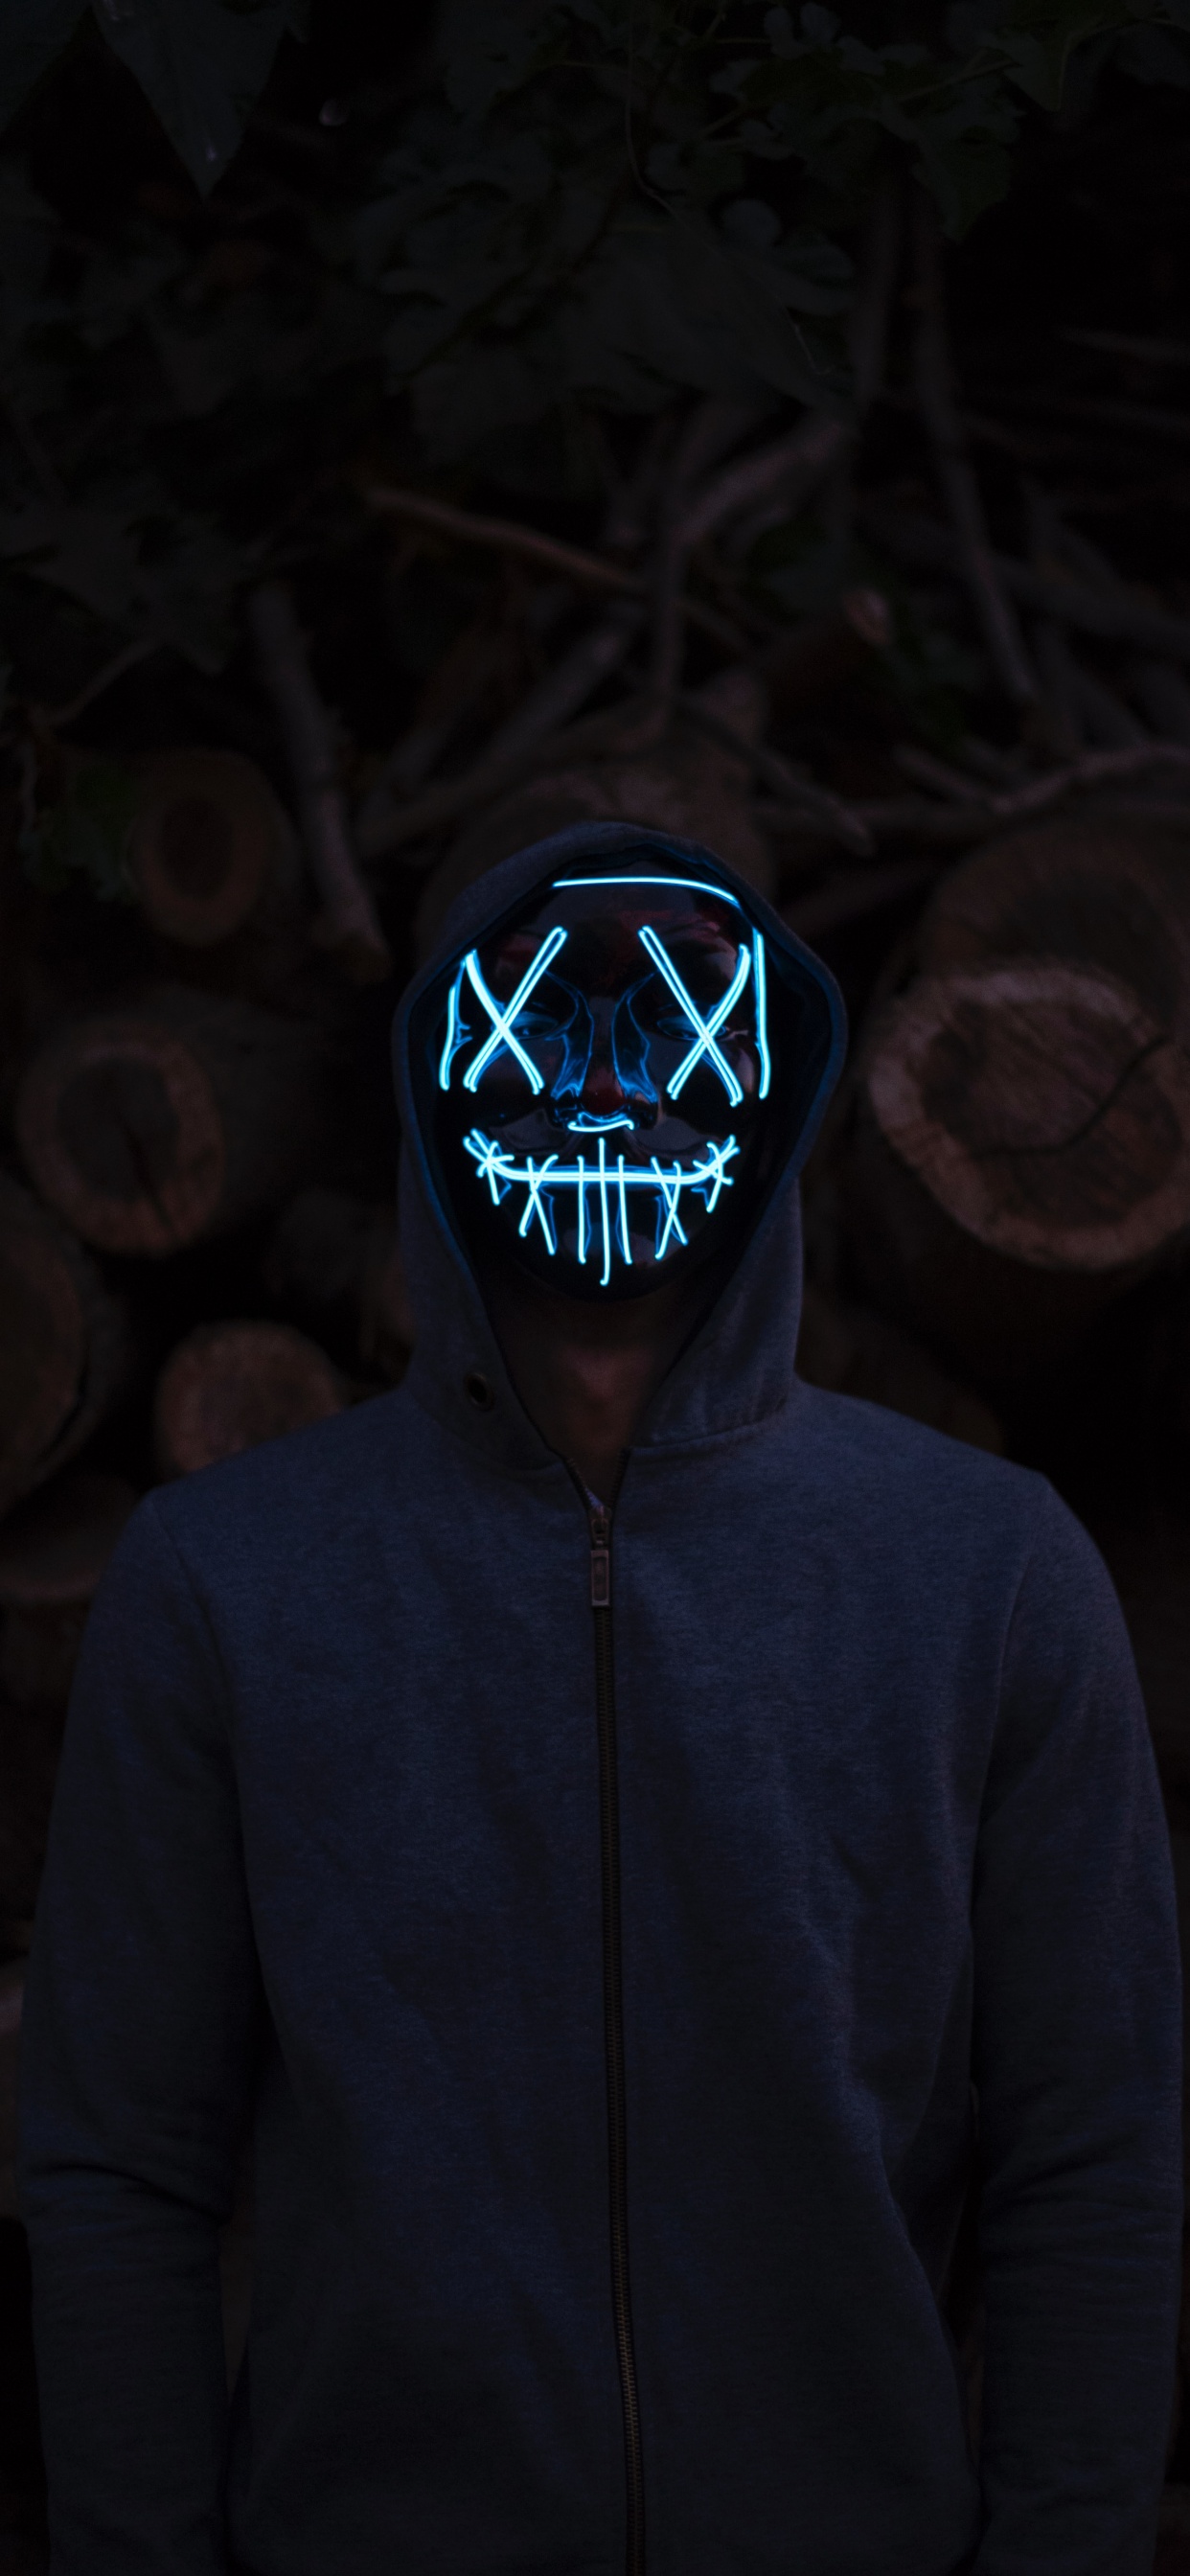 Man in LED mask Wallpaper for iPhone